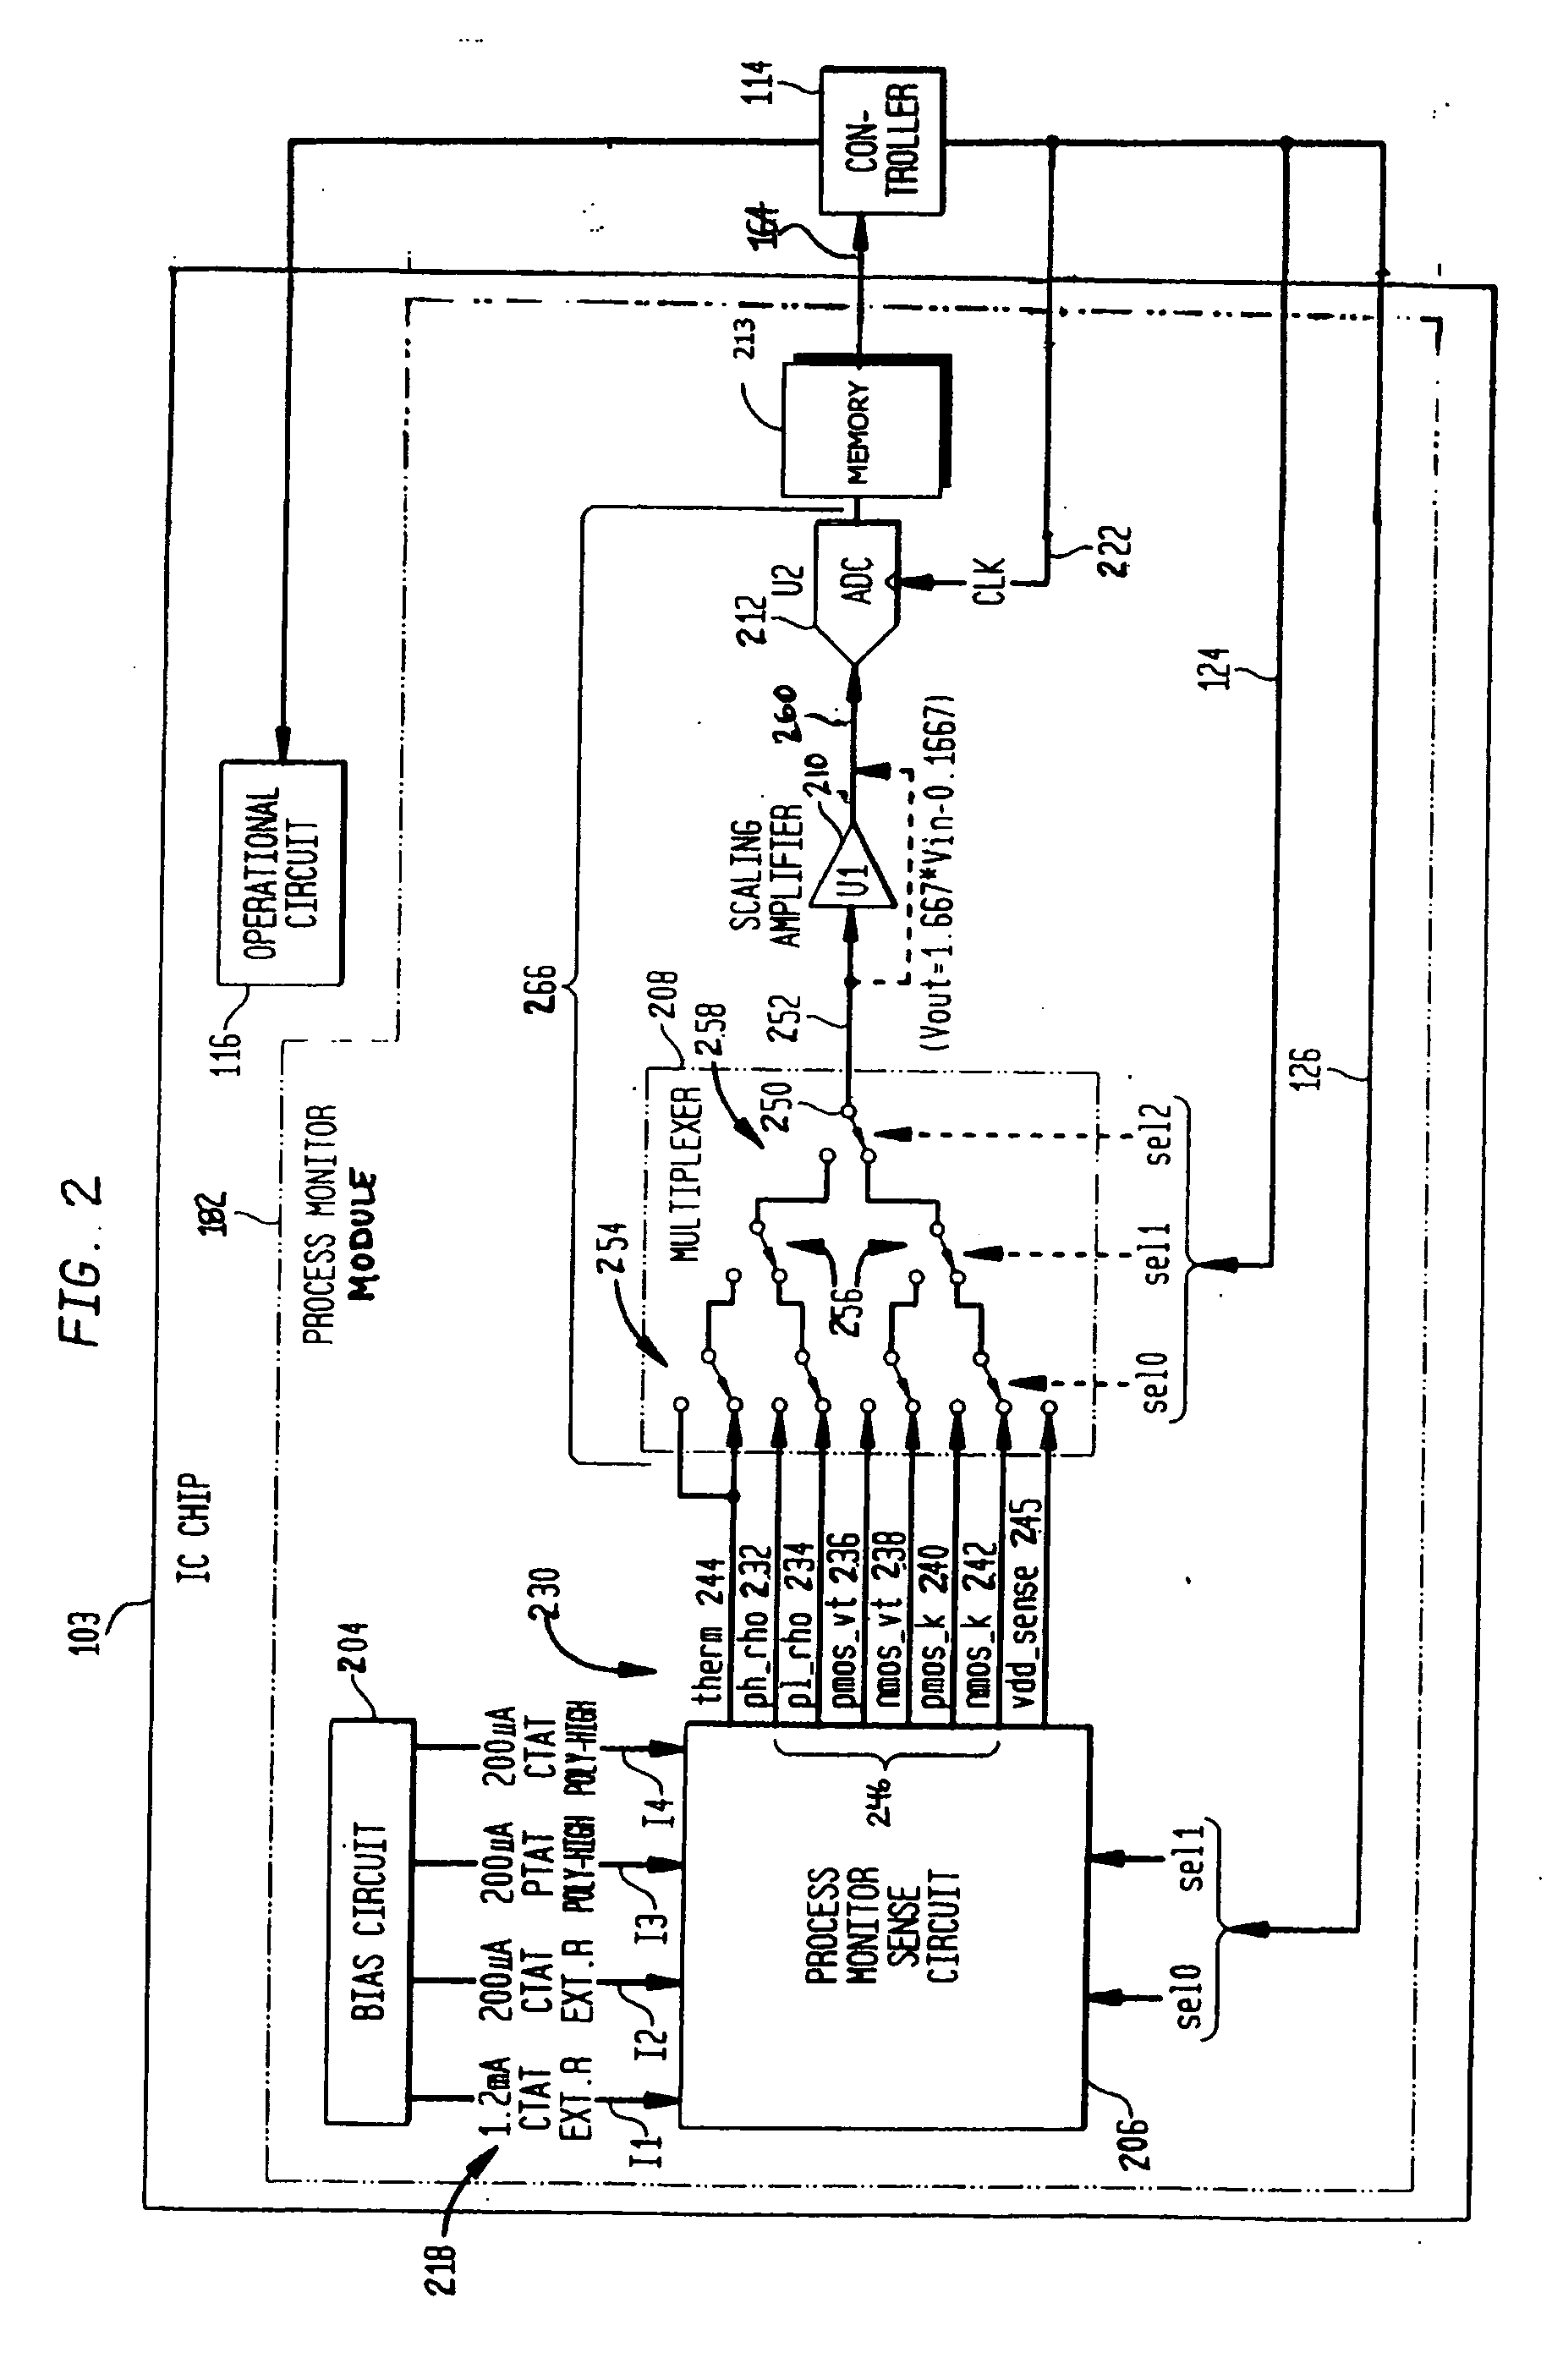 Process monitor for monitoring and compensating circuit performance